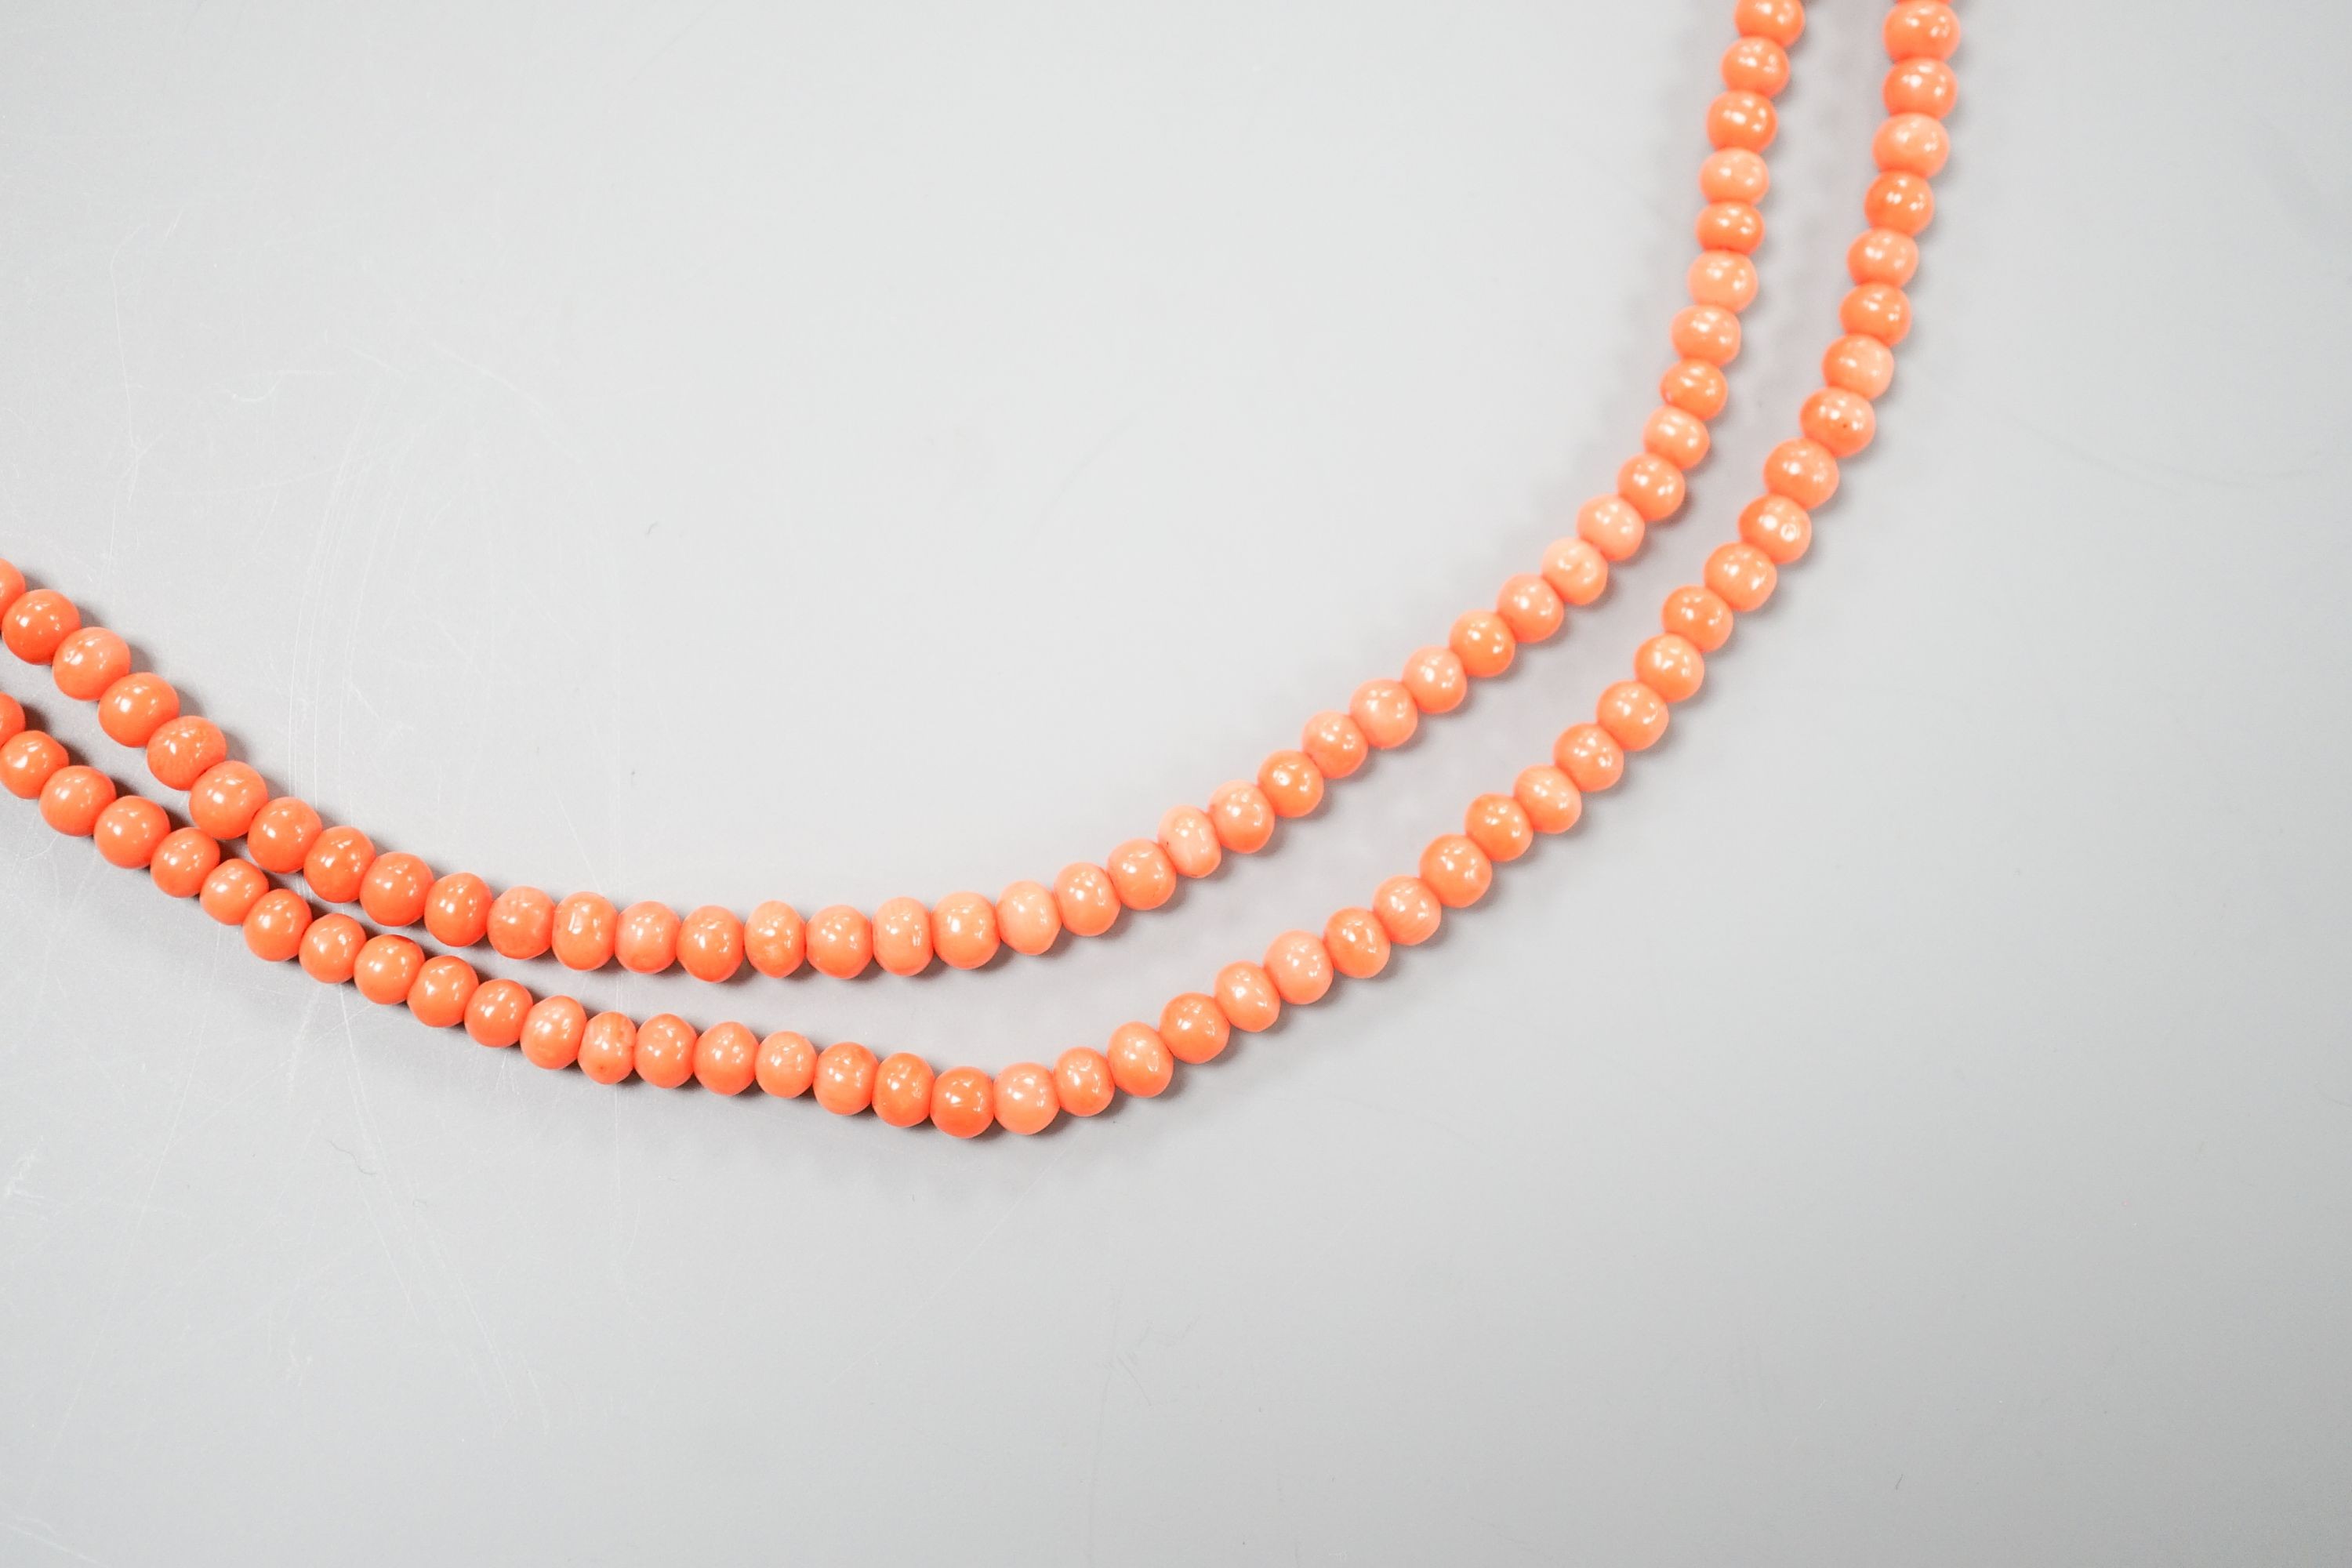 A single strand graduated coral bead necklace, 93cm, gross weight 28 grams.